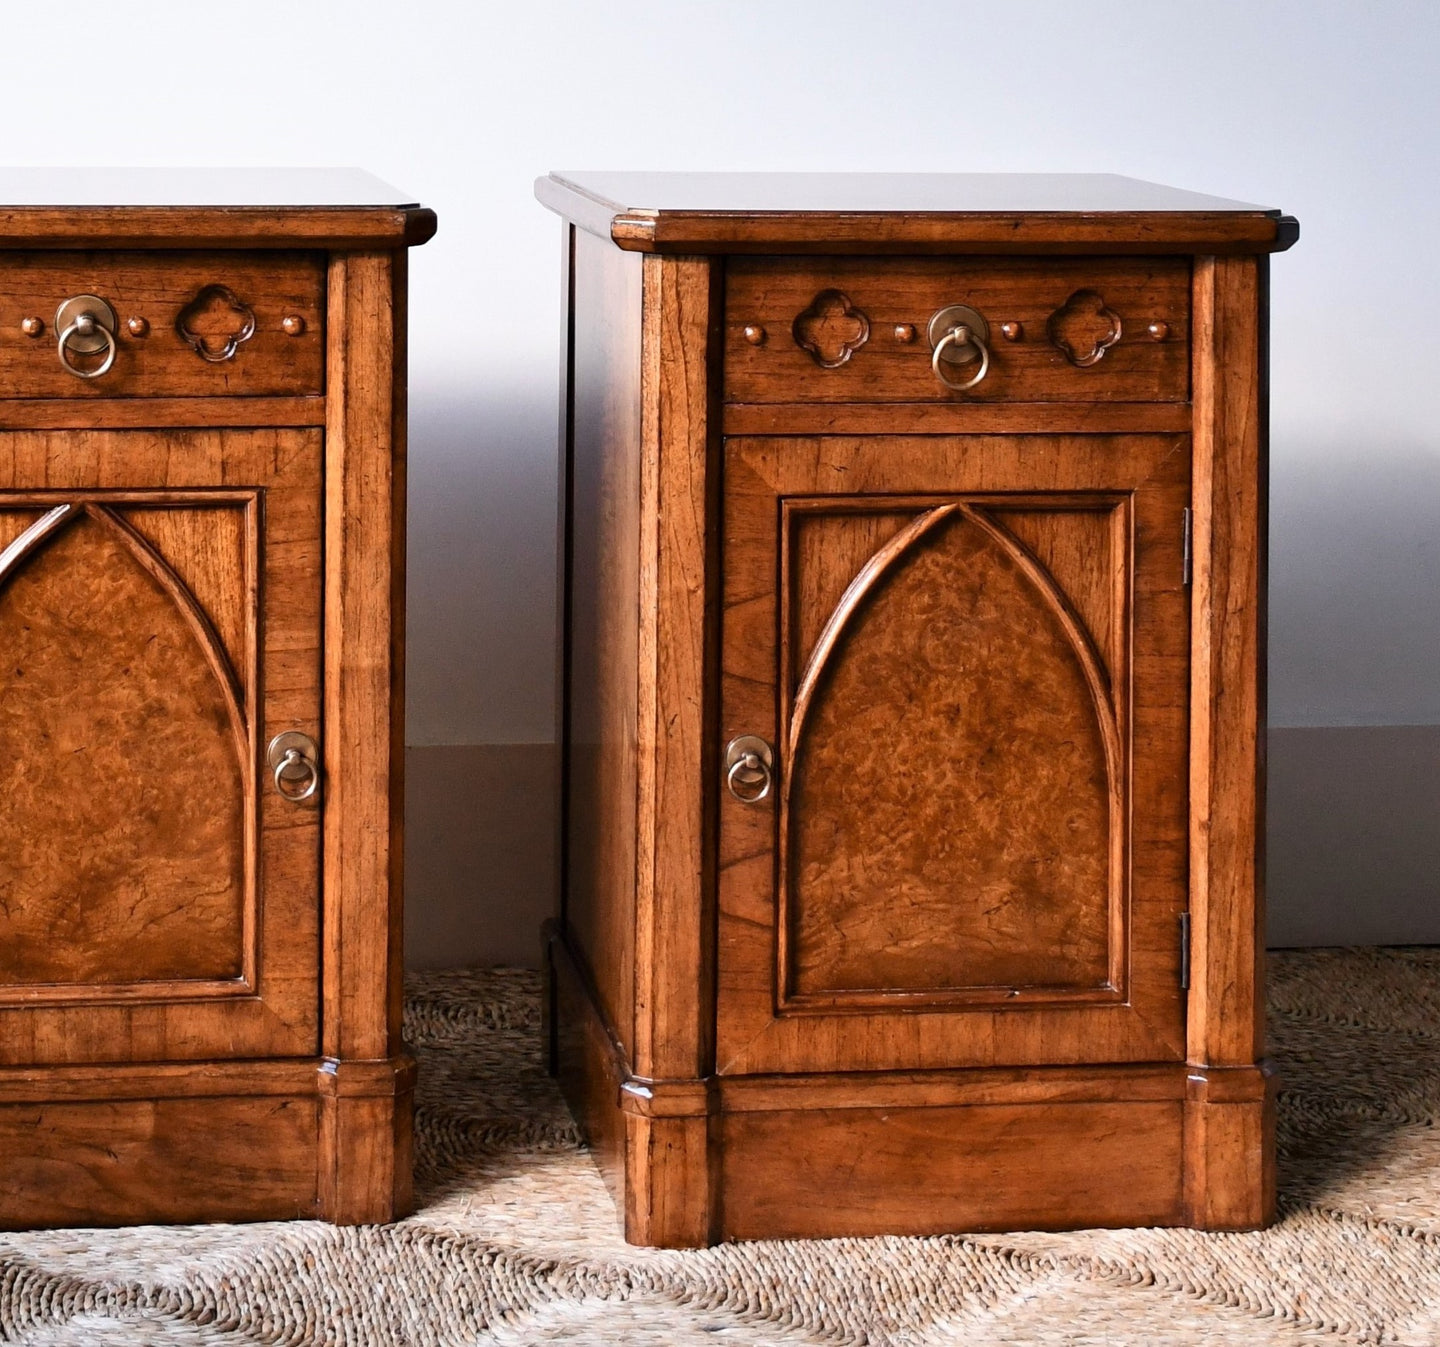 A Pair of Vintage Bedside Cabinets